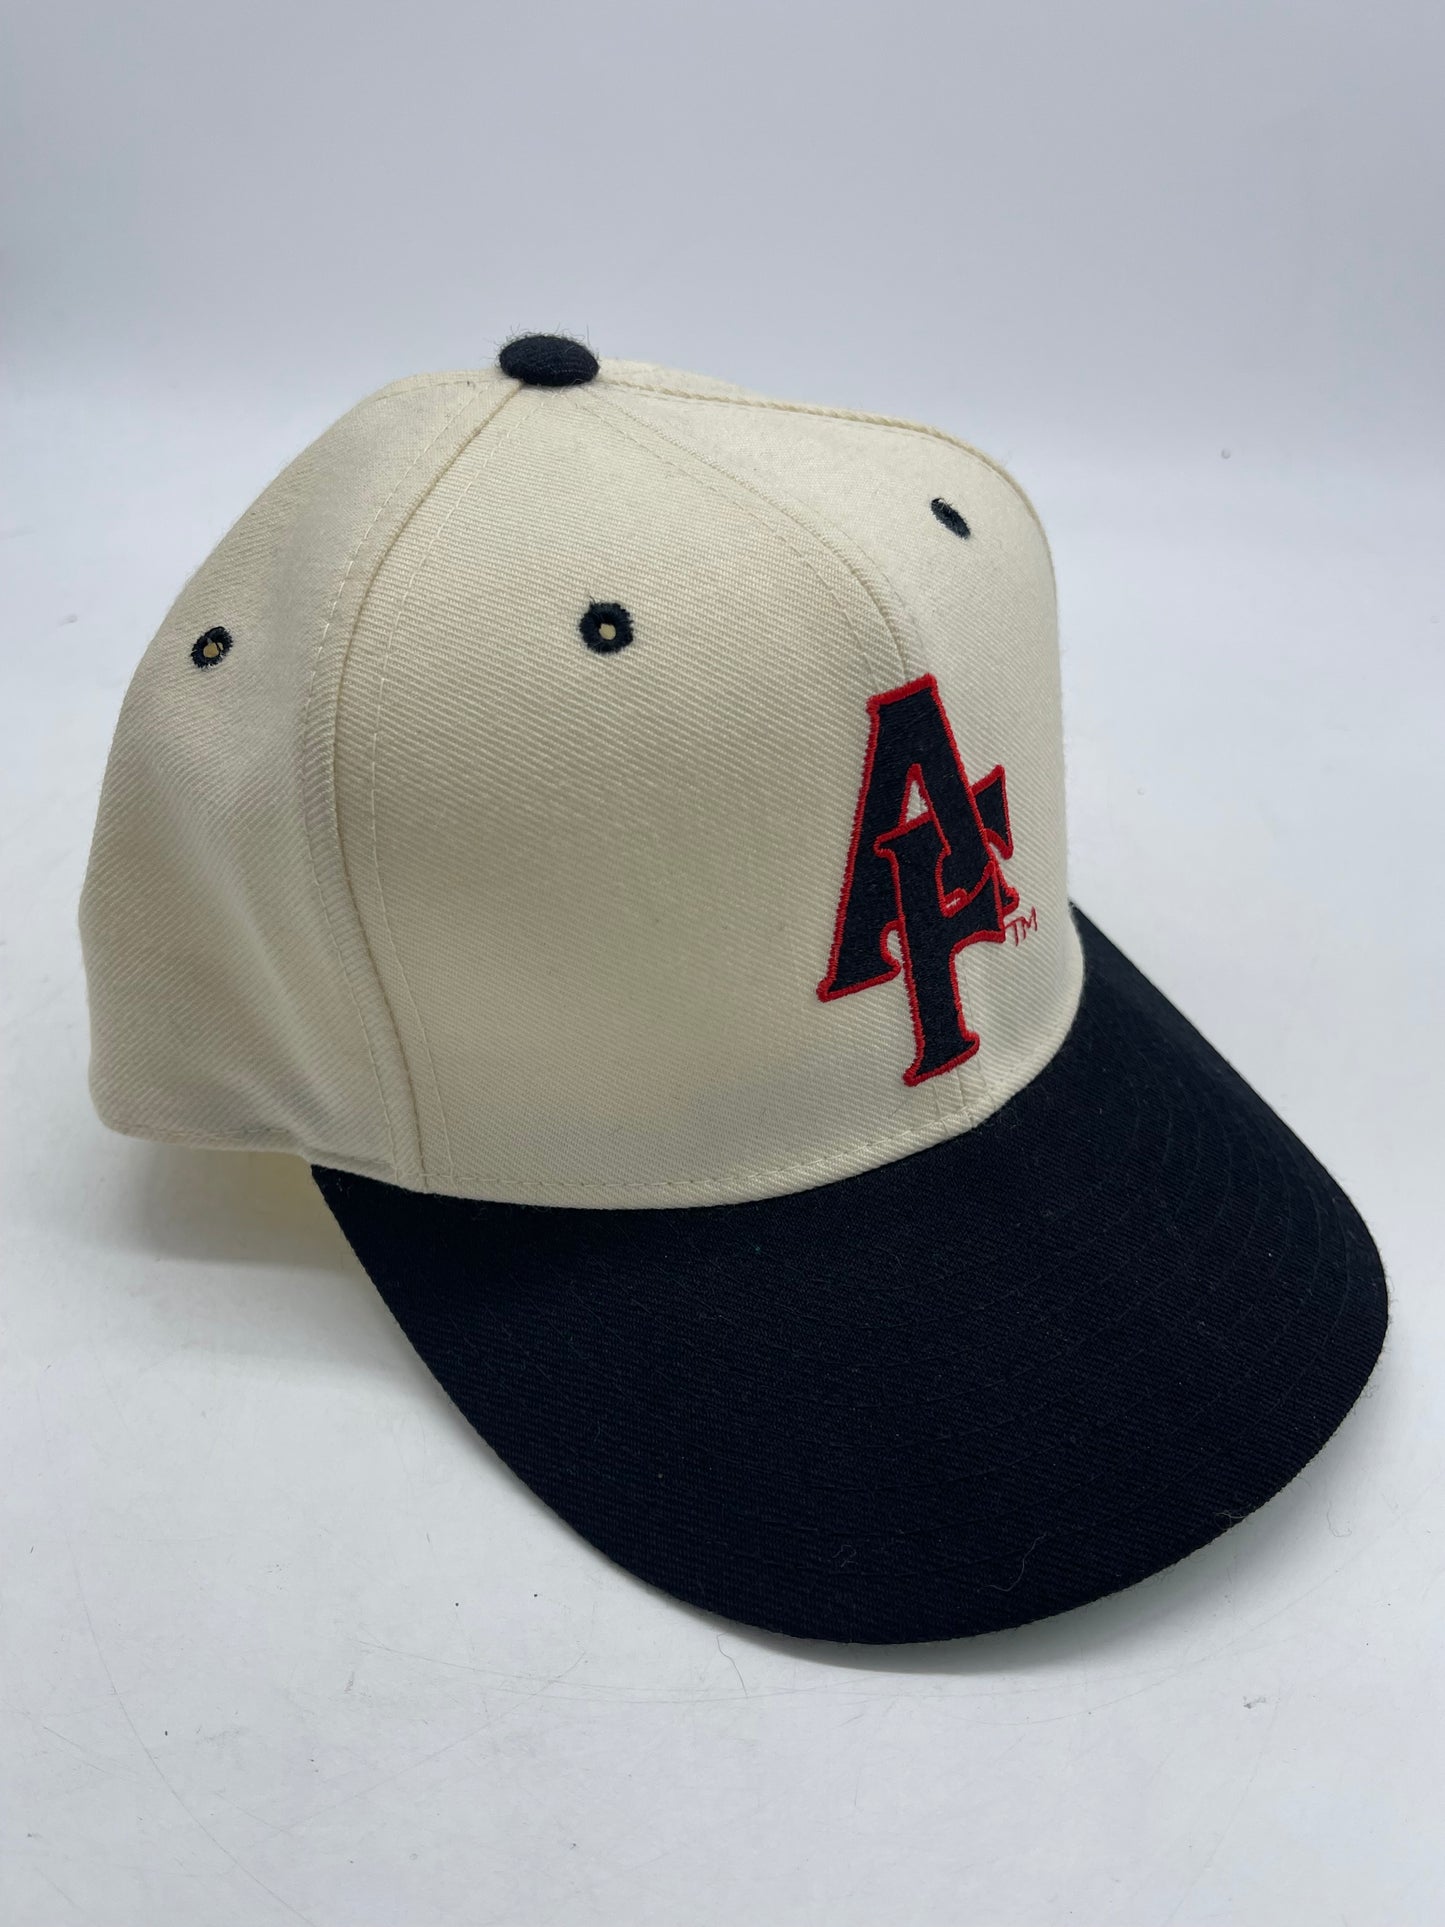 Load image into Gallery viewer, VTG 90s Atlanta Falcons Cream Fitted Hat Sz 7 1/4
